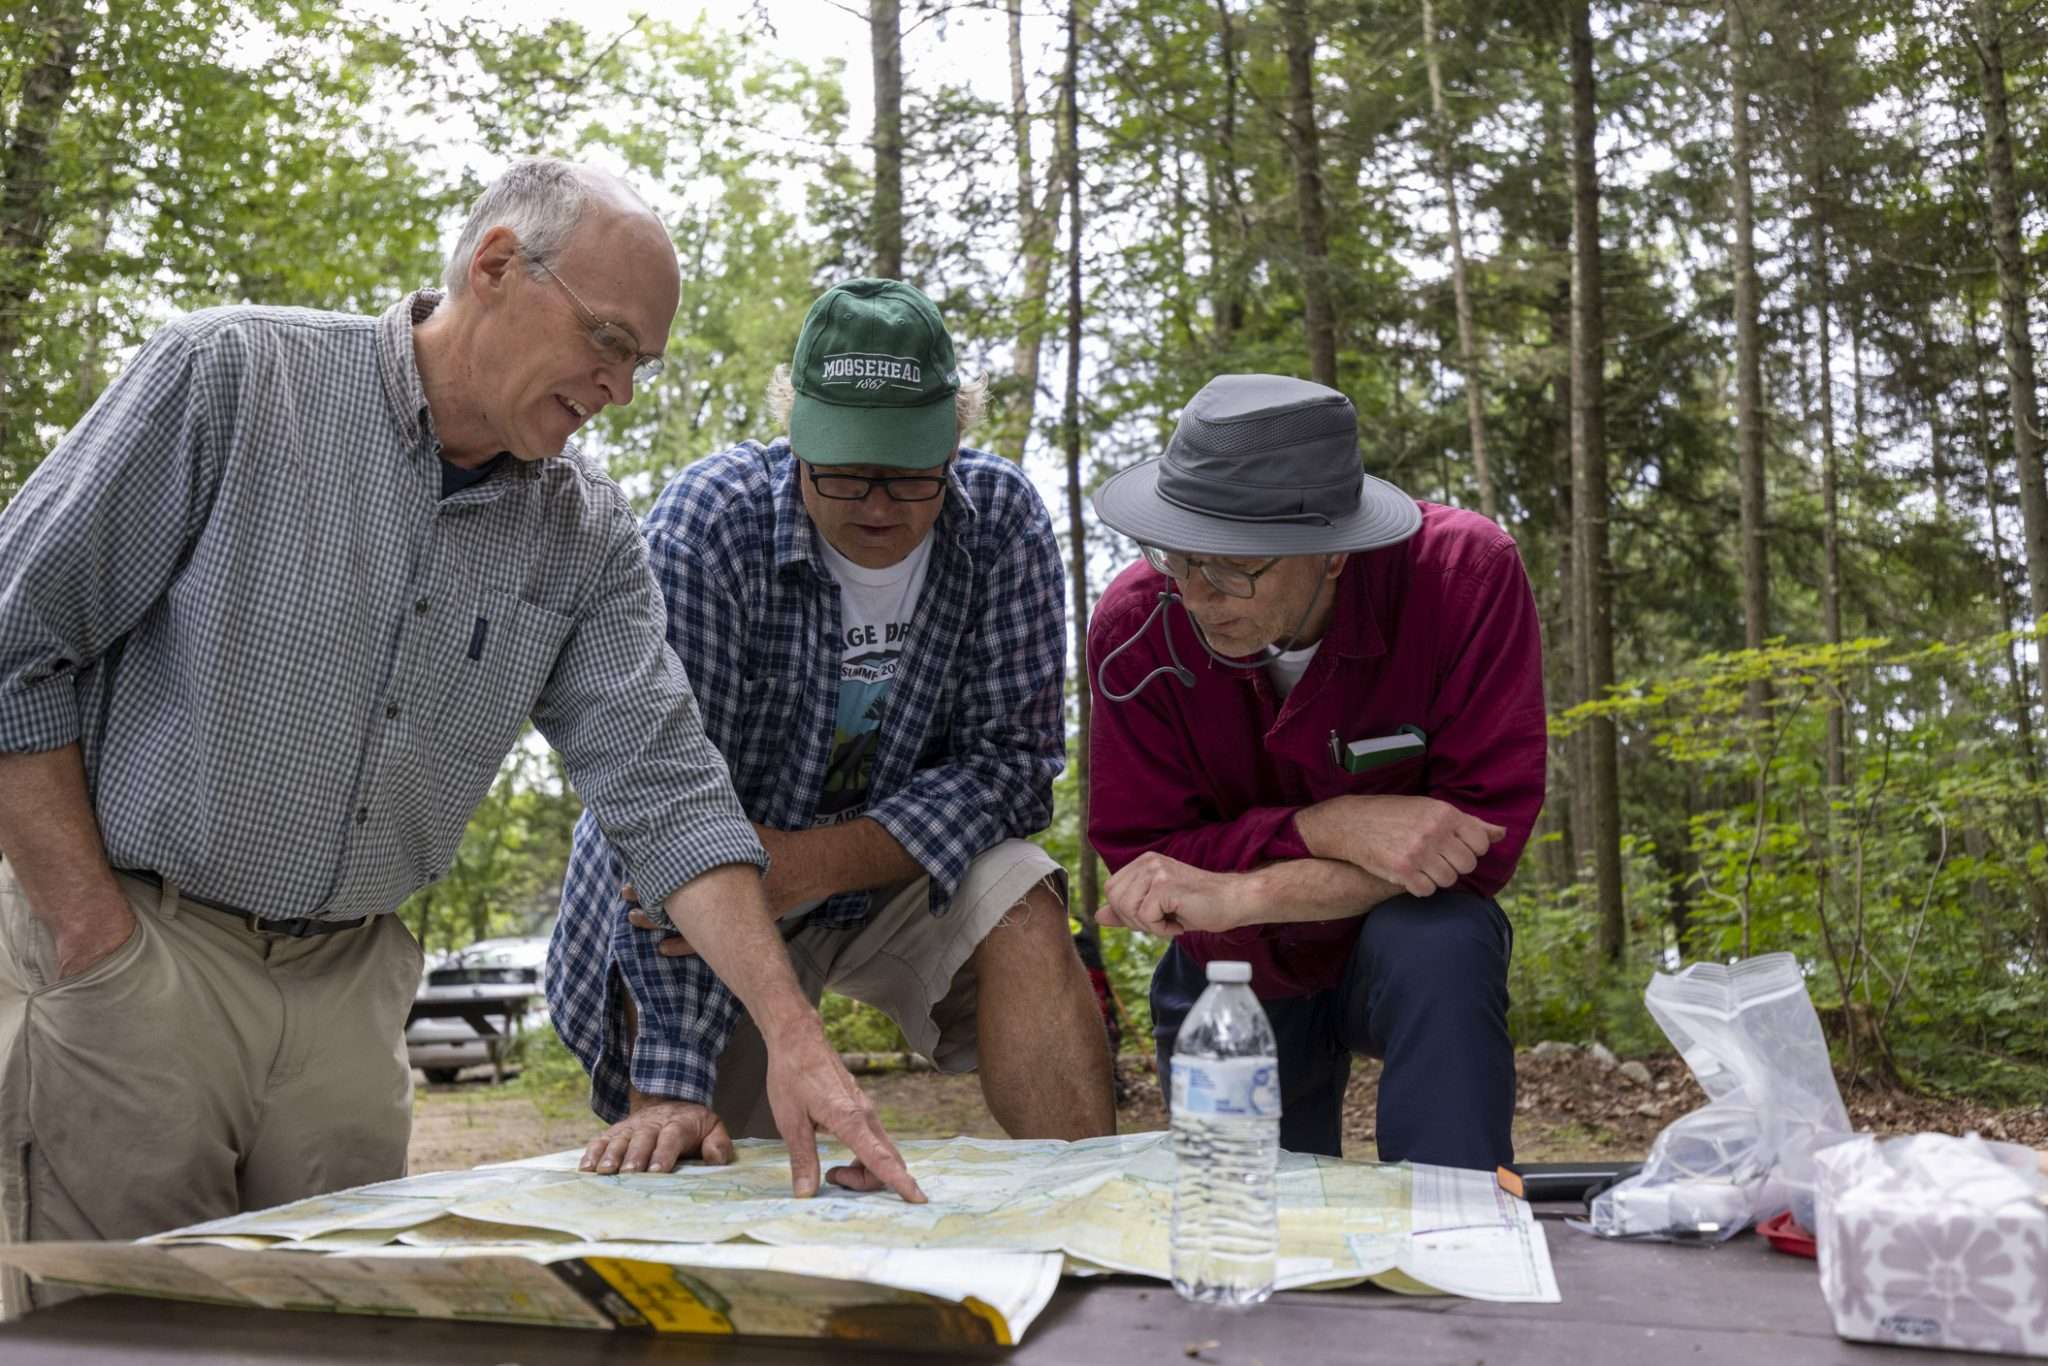 Scientist Bill Brown gives some advice Saturday to Bill Barkley and Jamieson Findlay before the start of their adventure. Photo by Mike Lynch